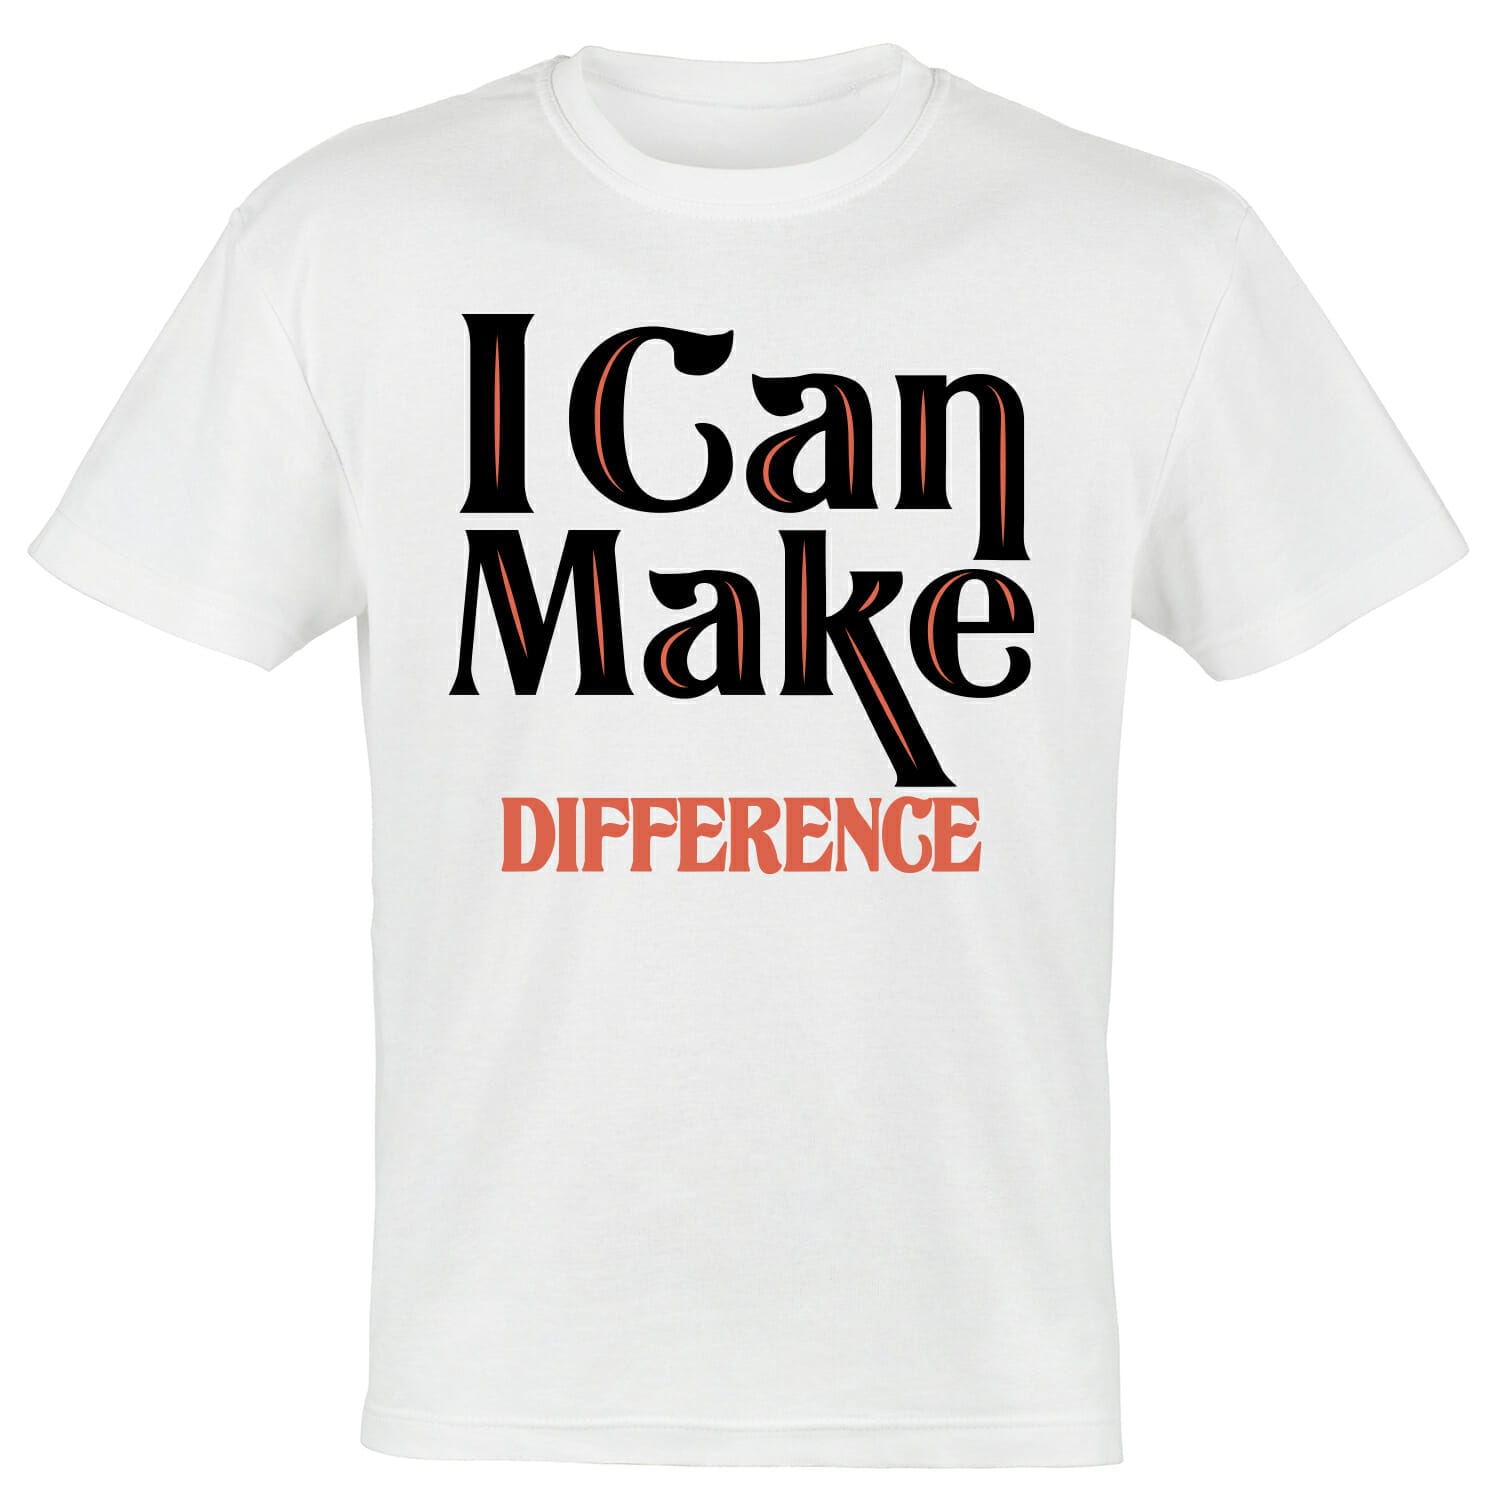 I can make difference tshirt design